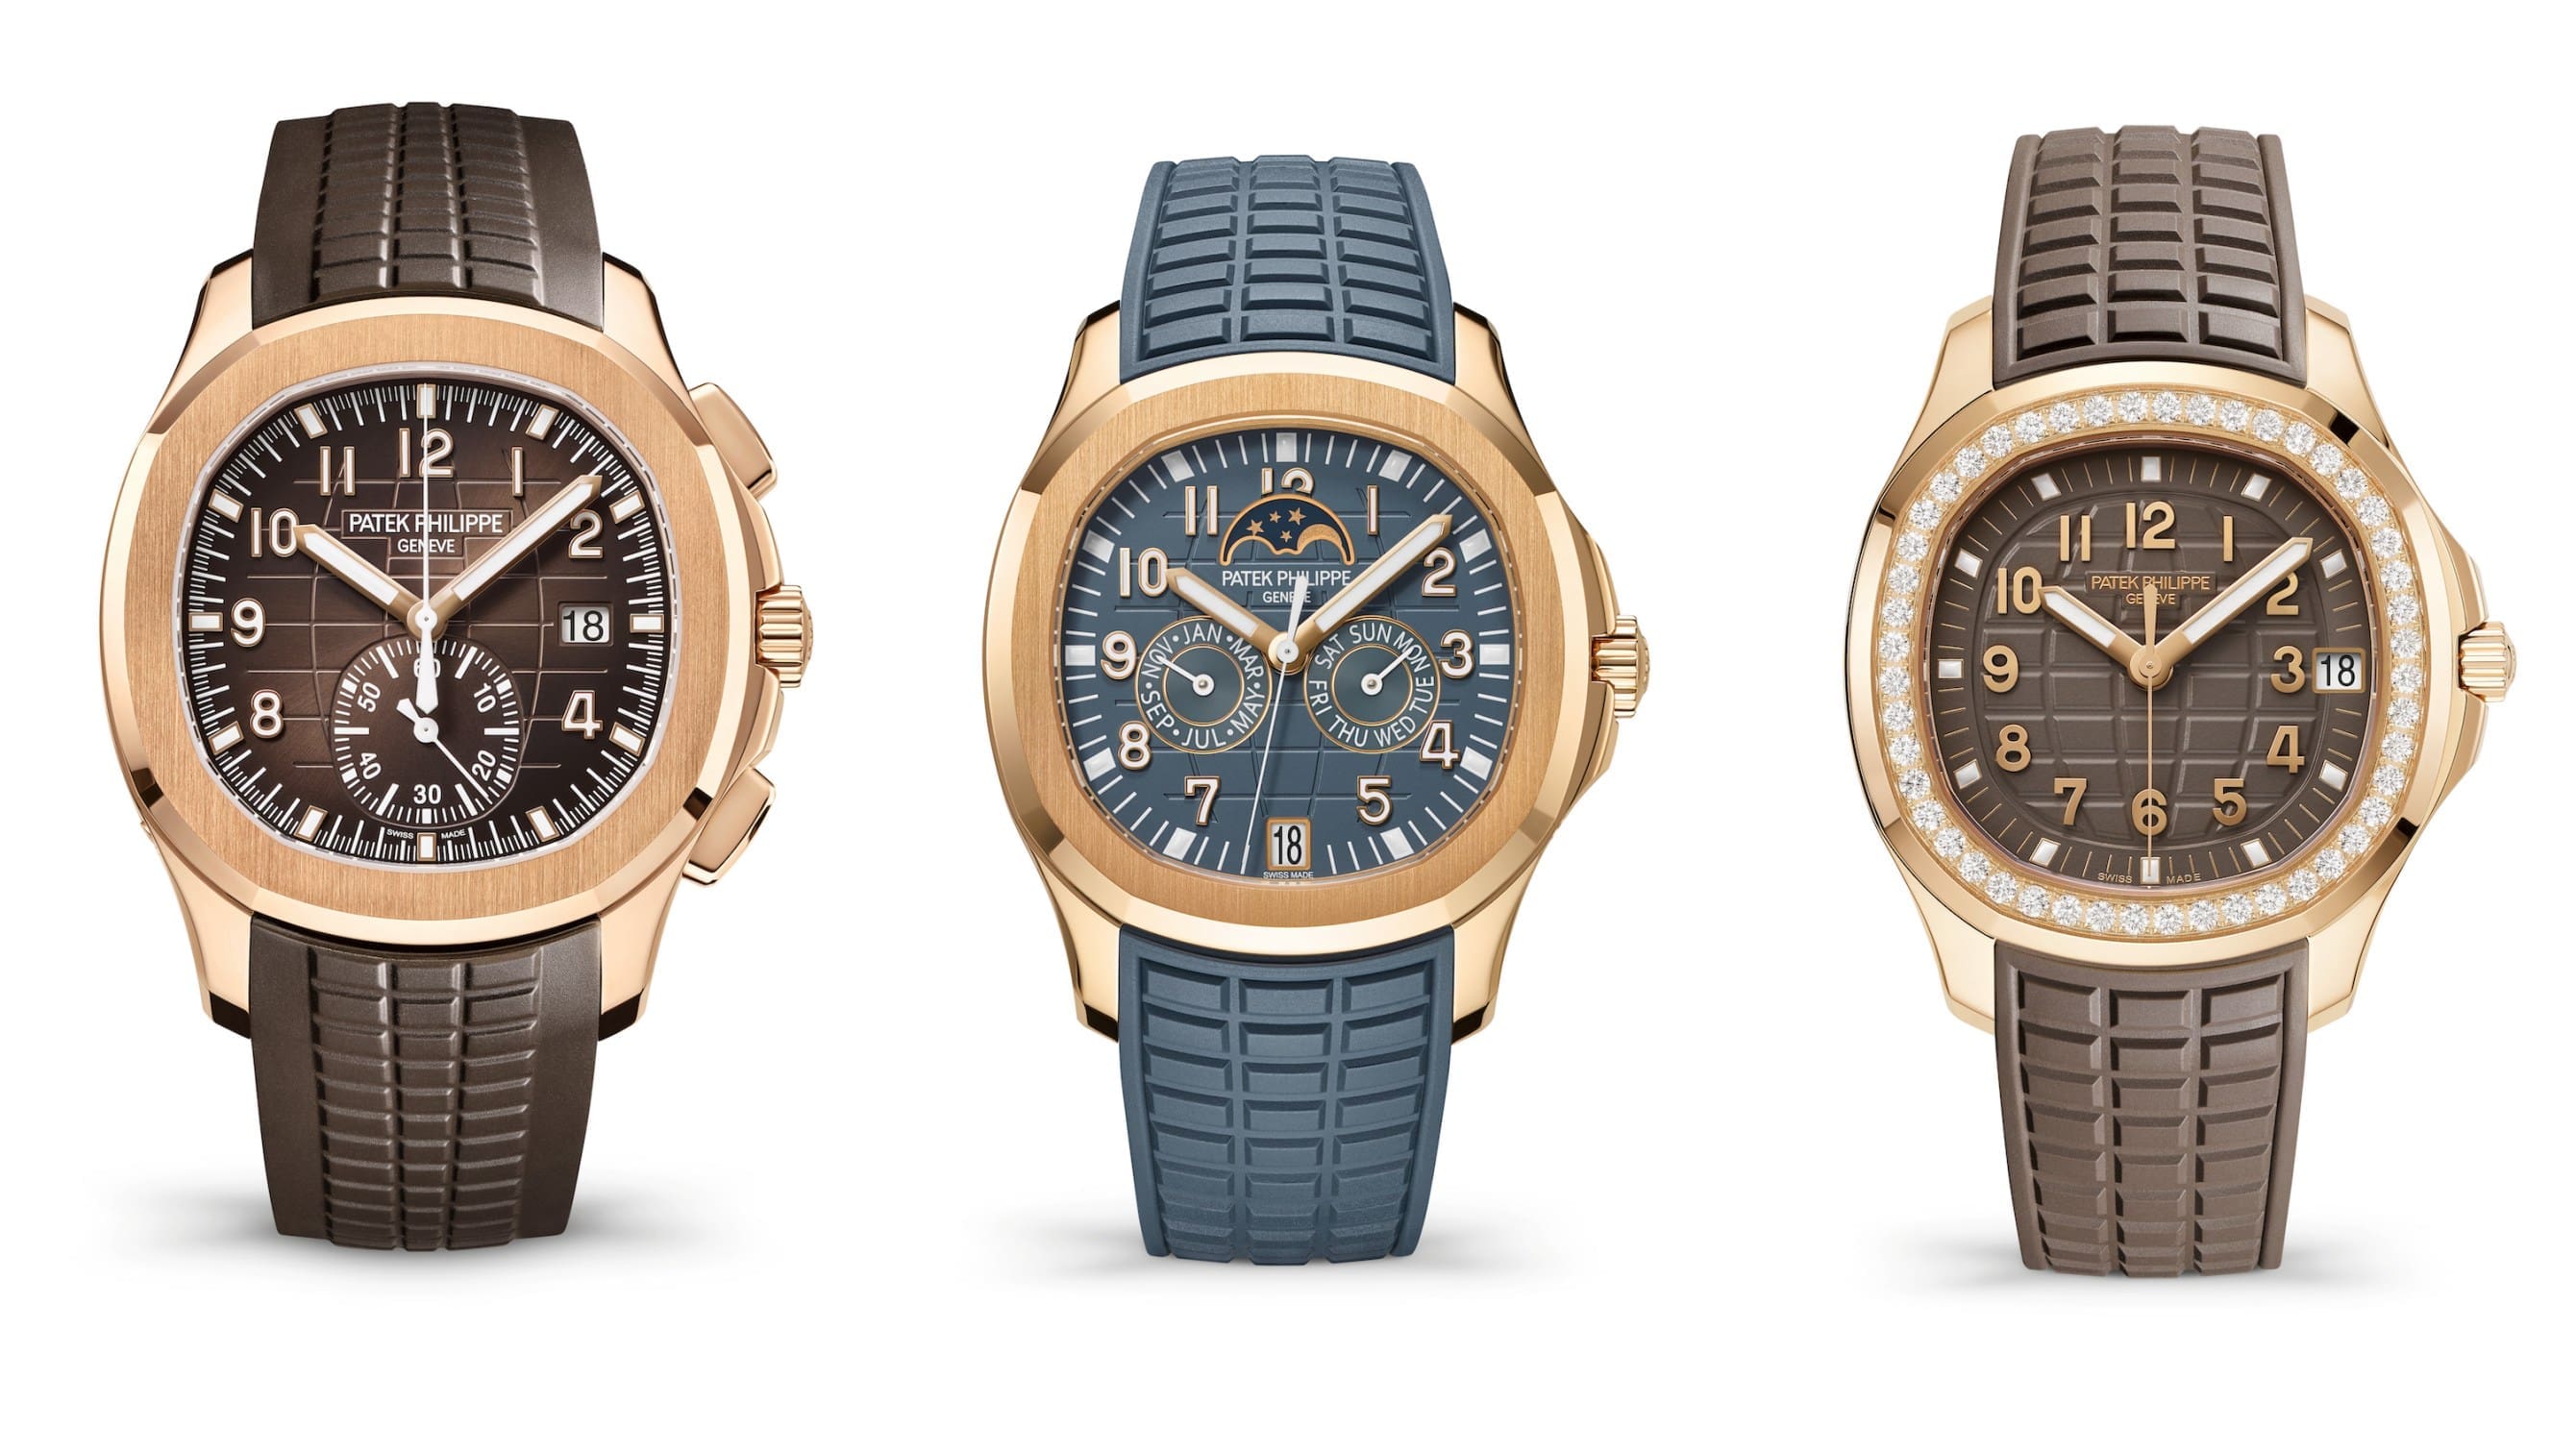 The Patek Philippe Aquanaut adds some delectable new chocolates and blue-greys to the line-up